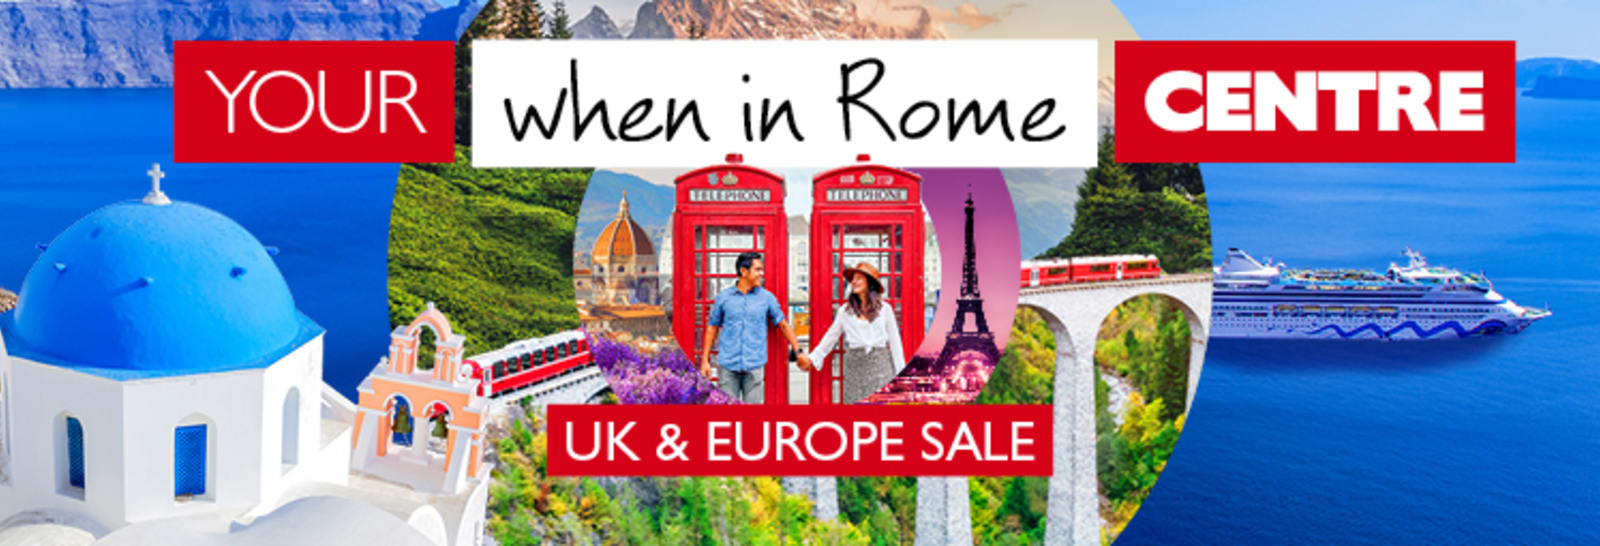 uk and europe sale banner